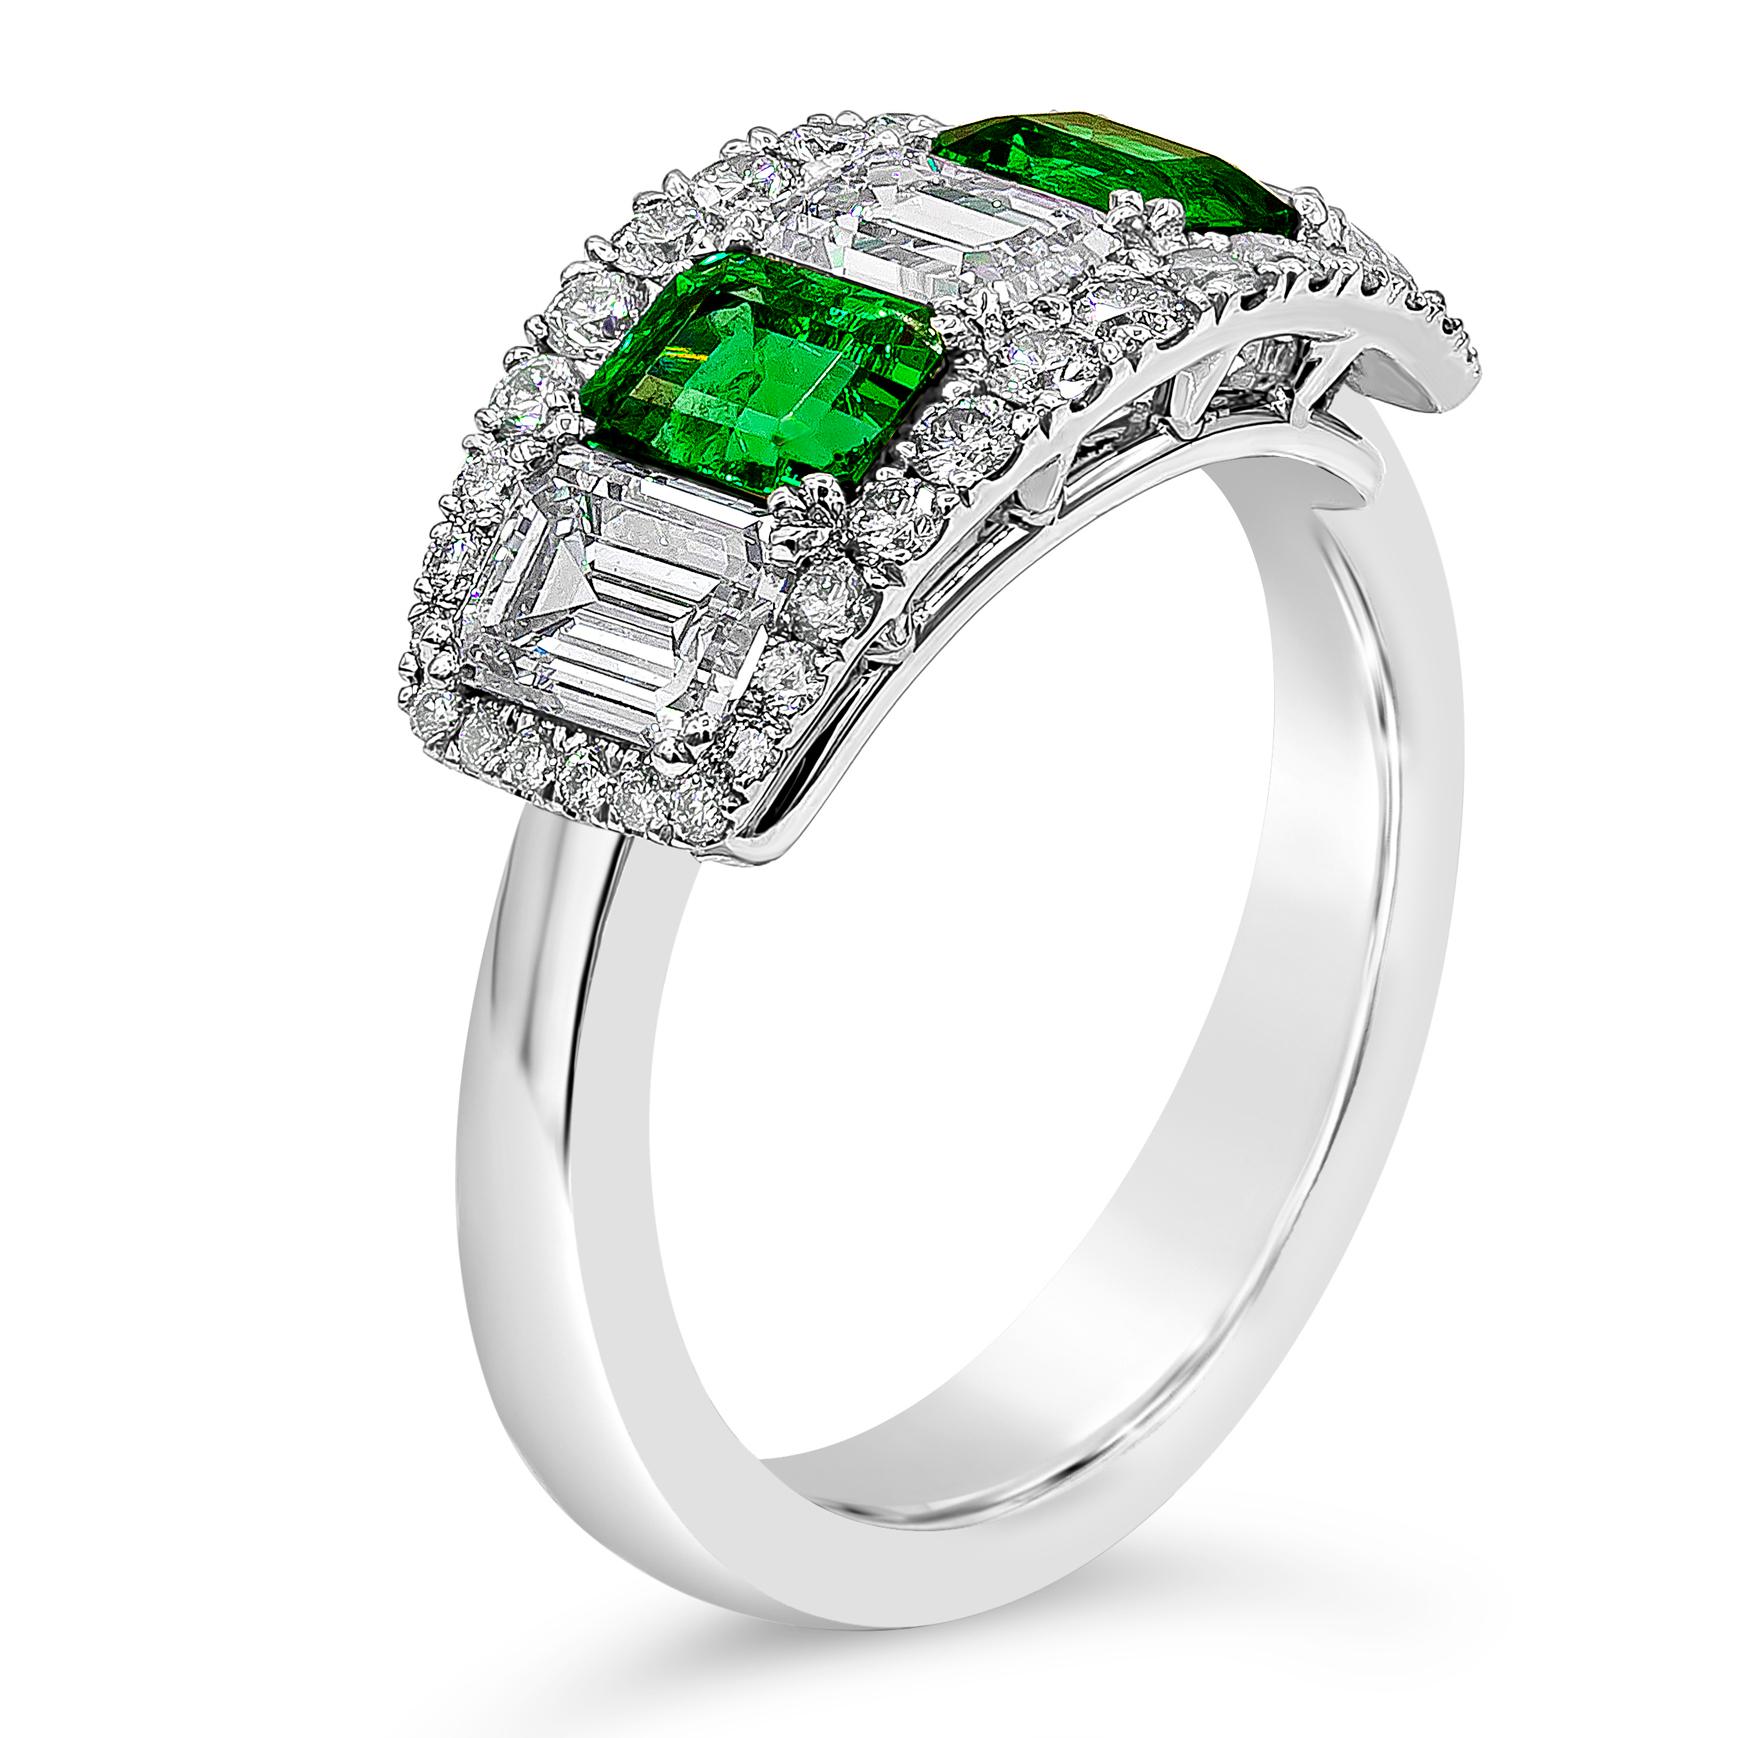 Contemporary 2.35 Carats Total Emerald Cut Green Emerald and Diamond Five-Stone Fashion Ring For Sale